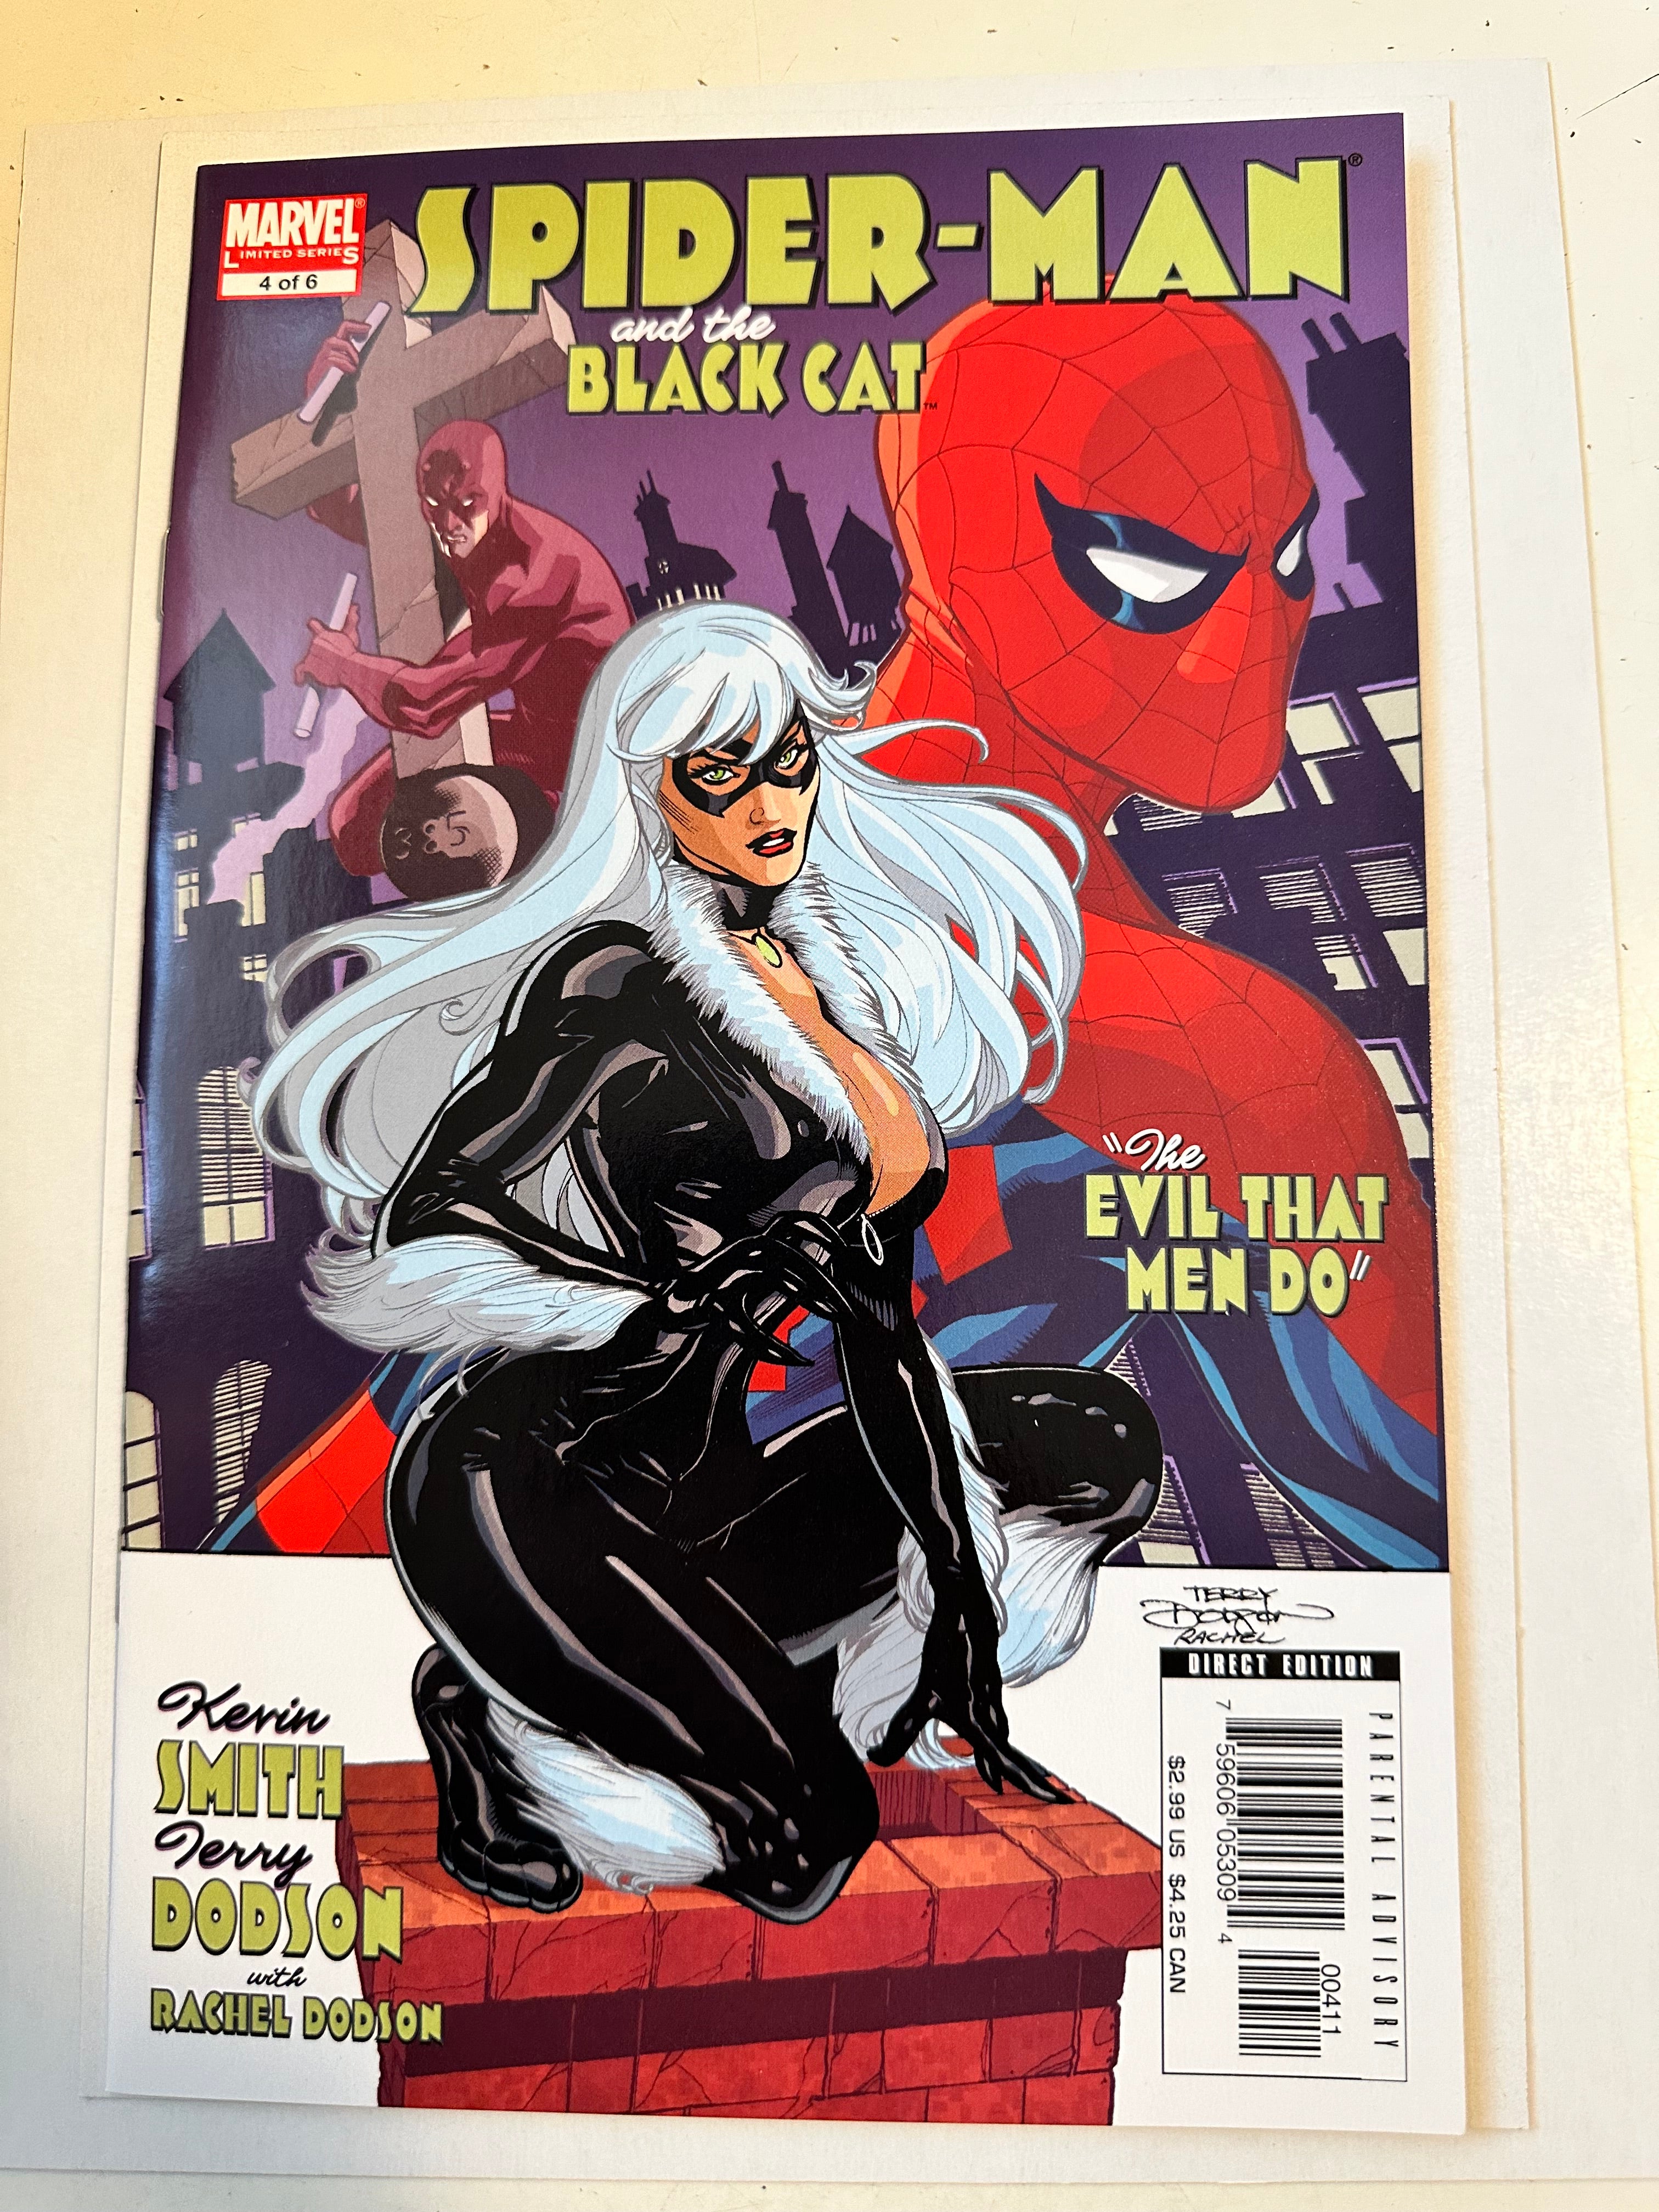 Spider-Man and the Black Cat #4 of 6 vf condition comic book